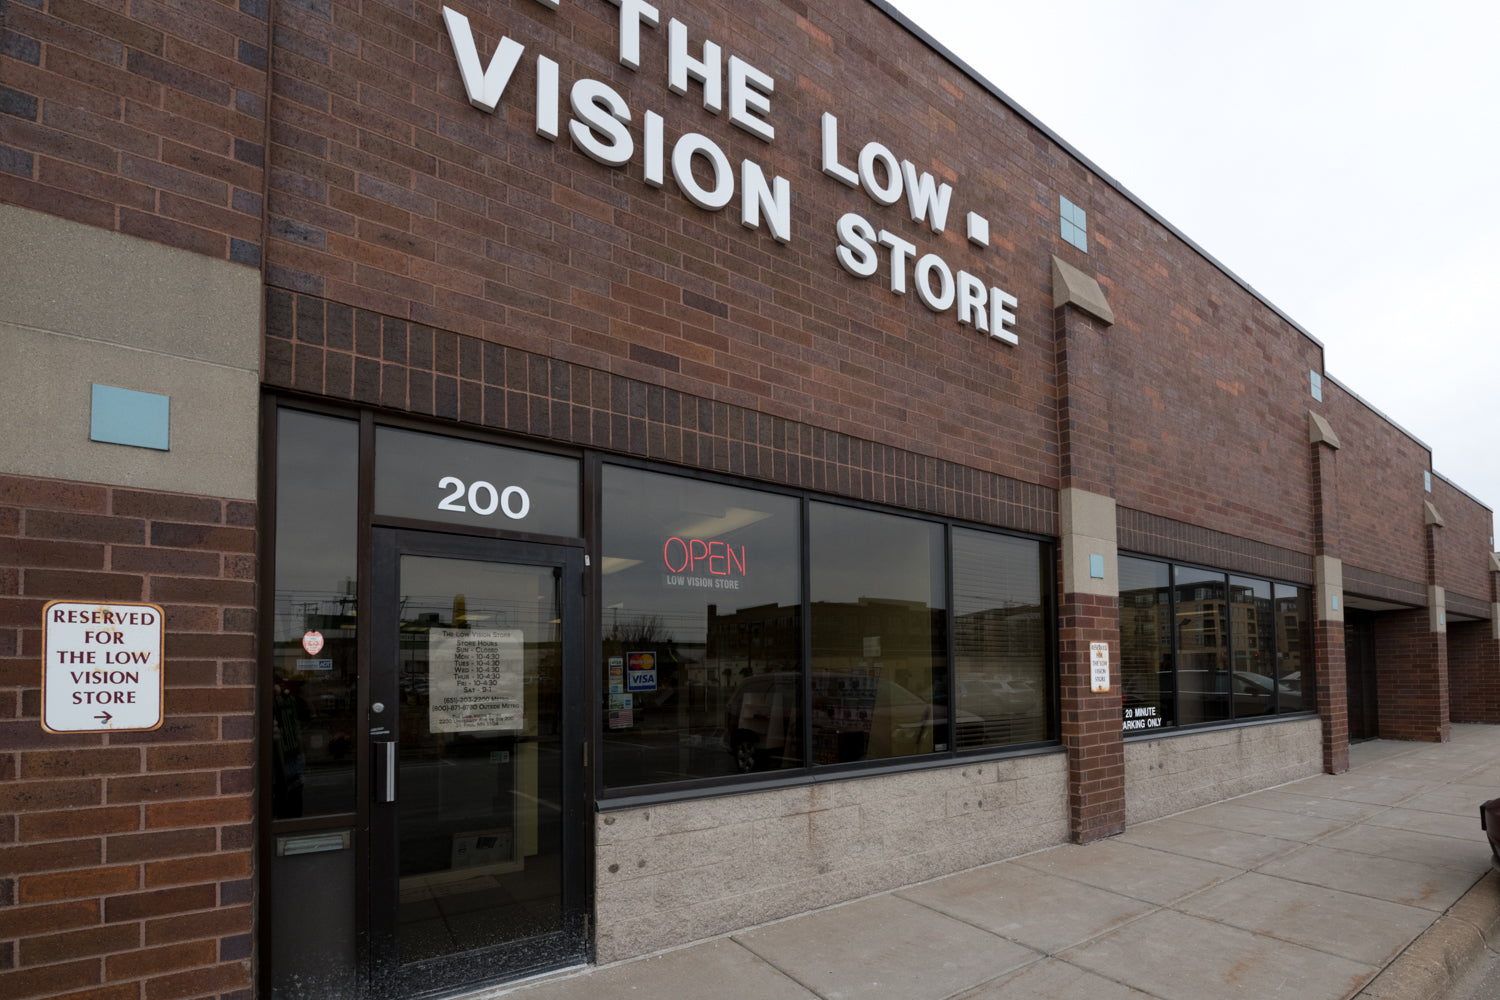 The Low Vision Store